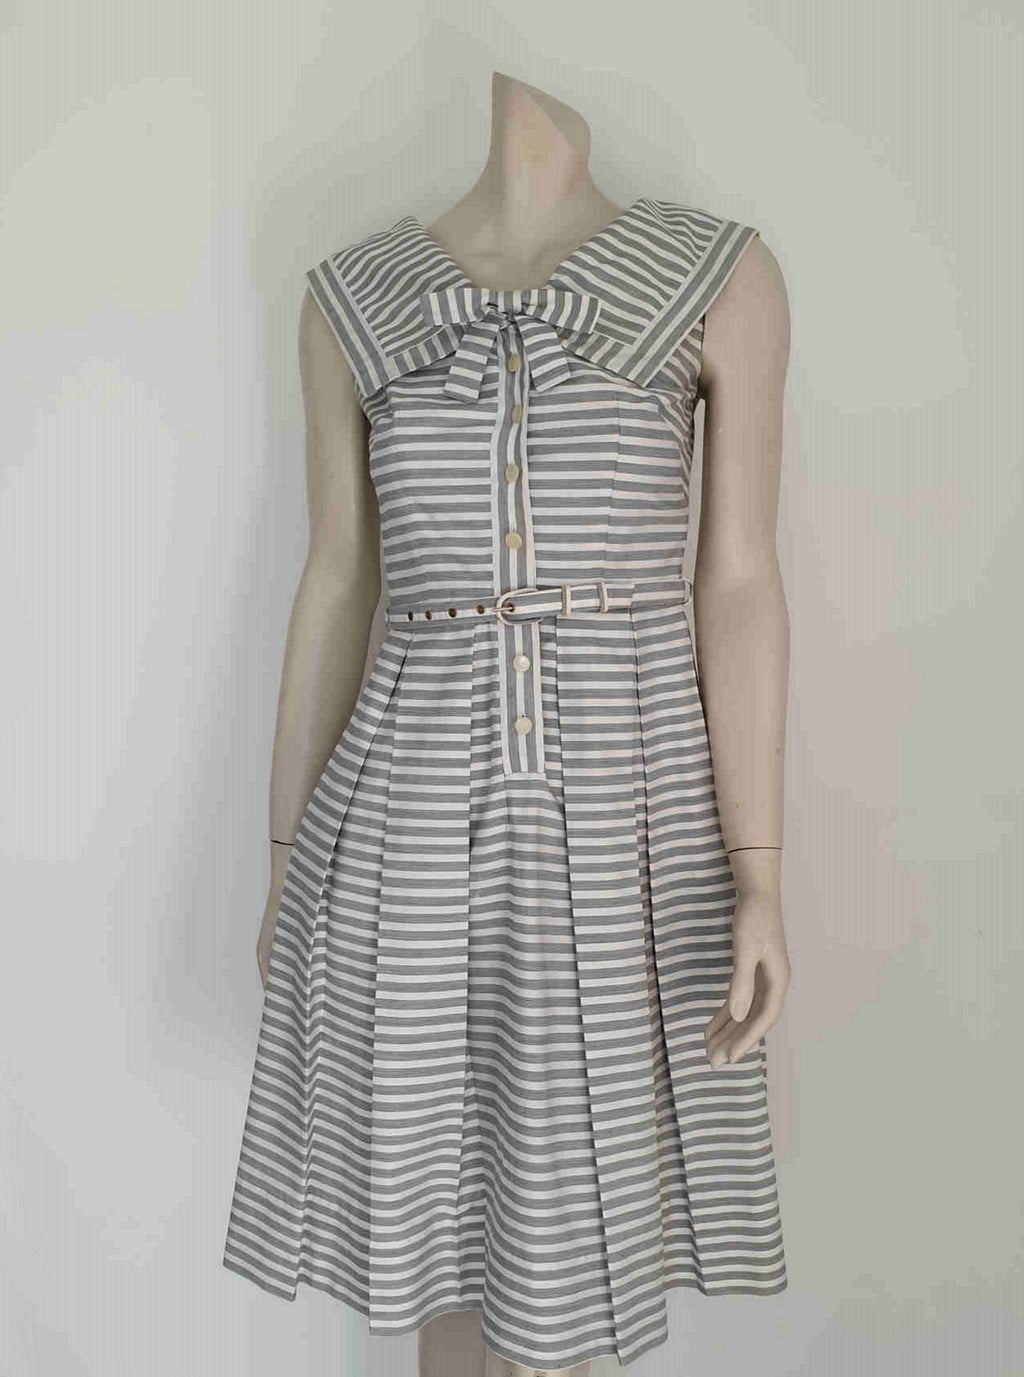 1960s vintage dress with portrait collar and box pleated skirt by leroy